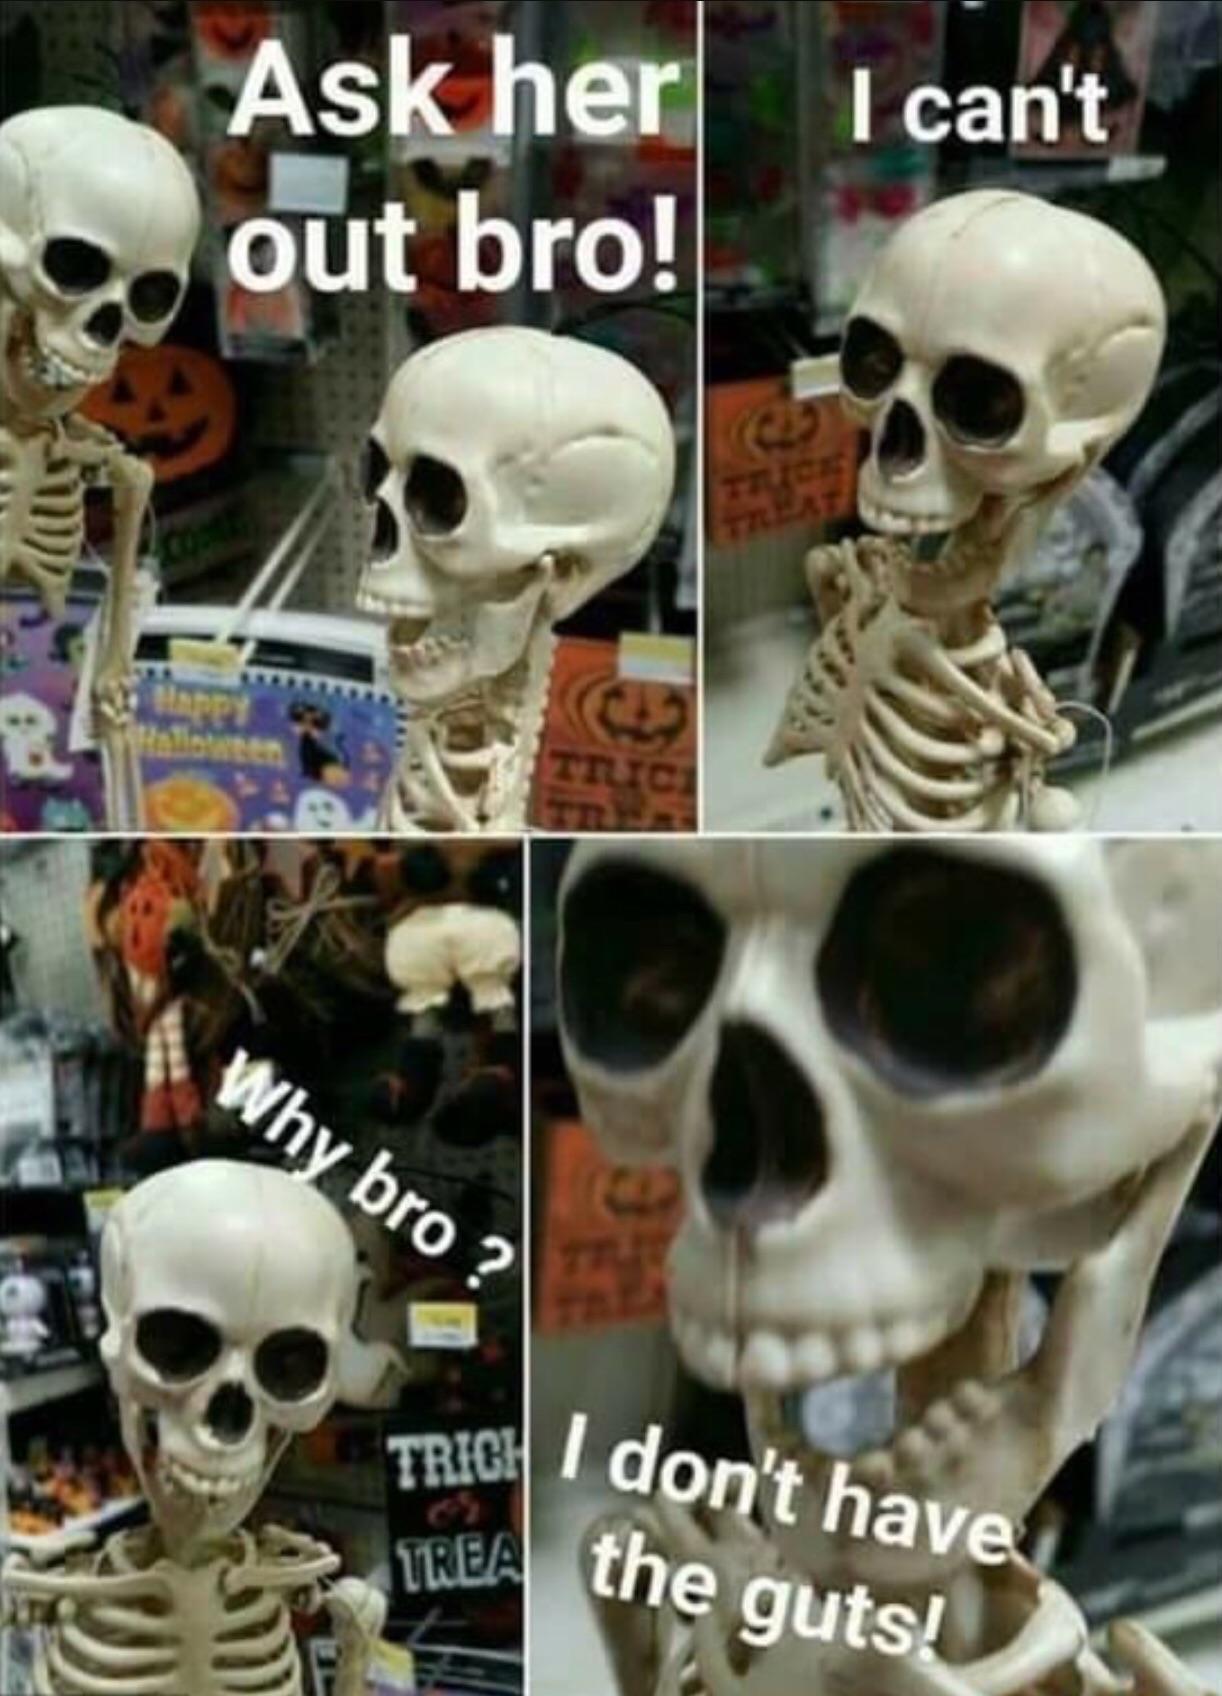 skeleton i don t have the guts - Ask her I can't out bro! Why bro? Rich I don't have Trea the guts!